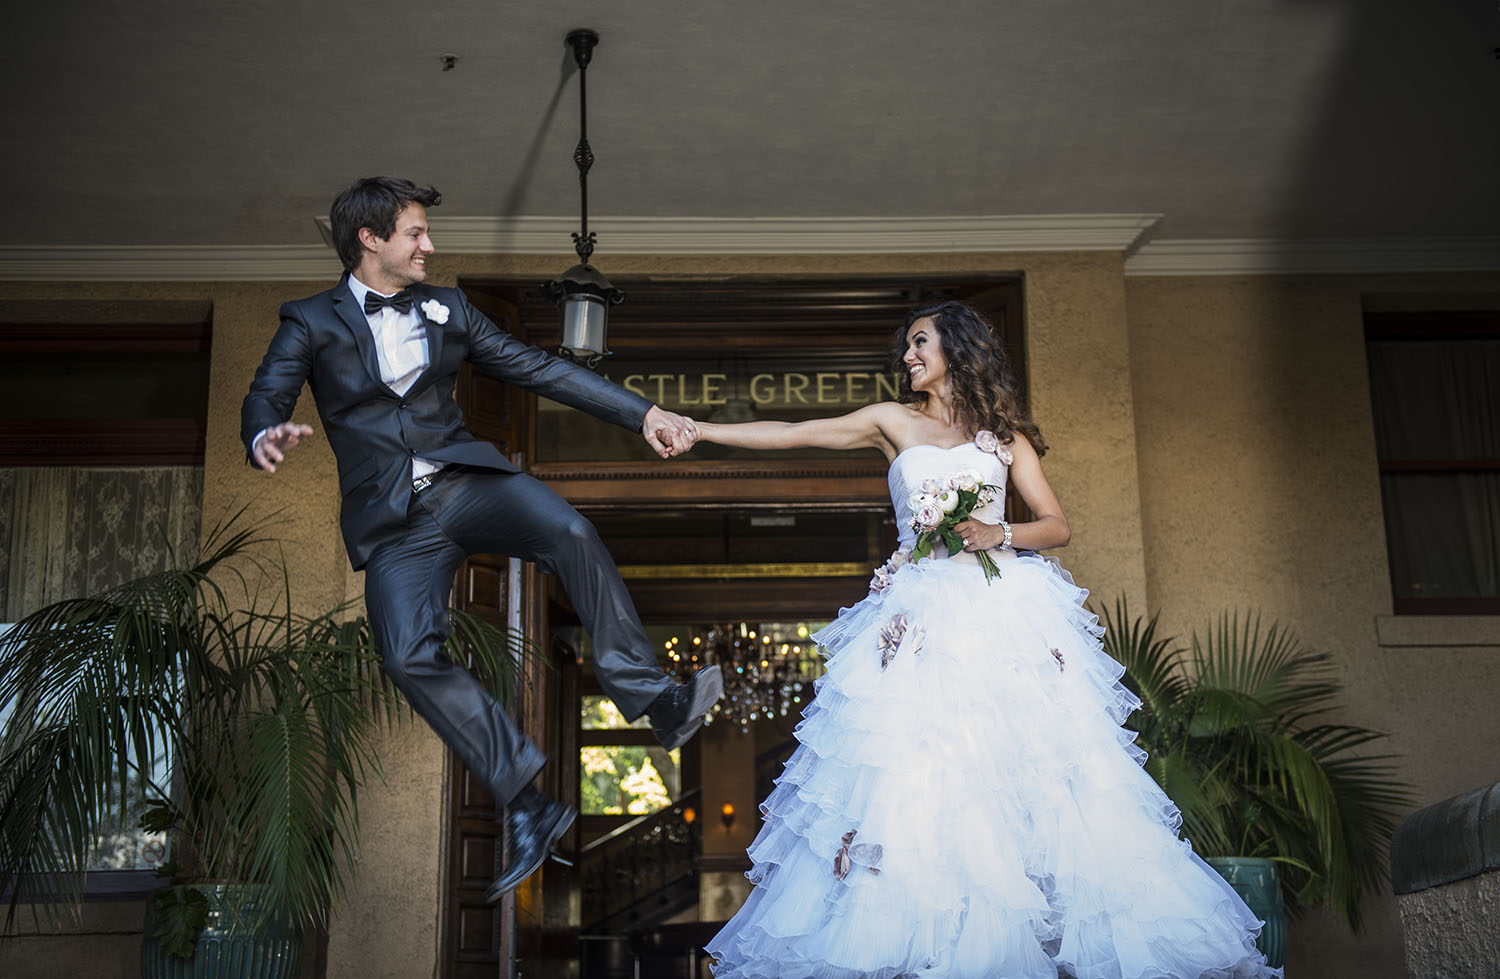 The groom jumps for joy because the wedding photography is so great. 